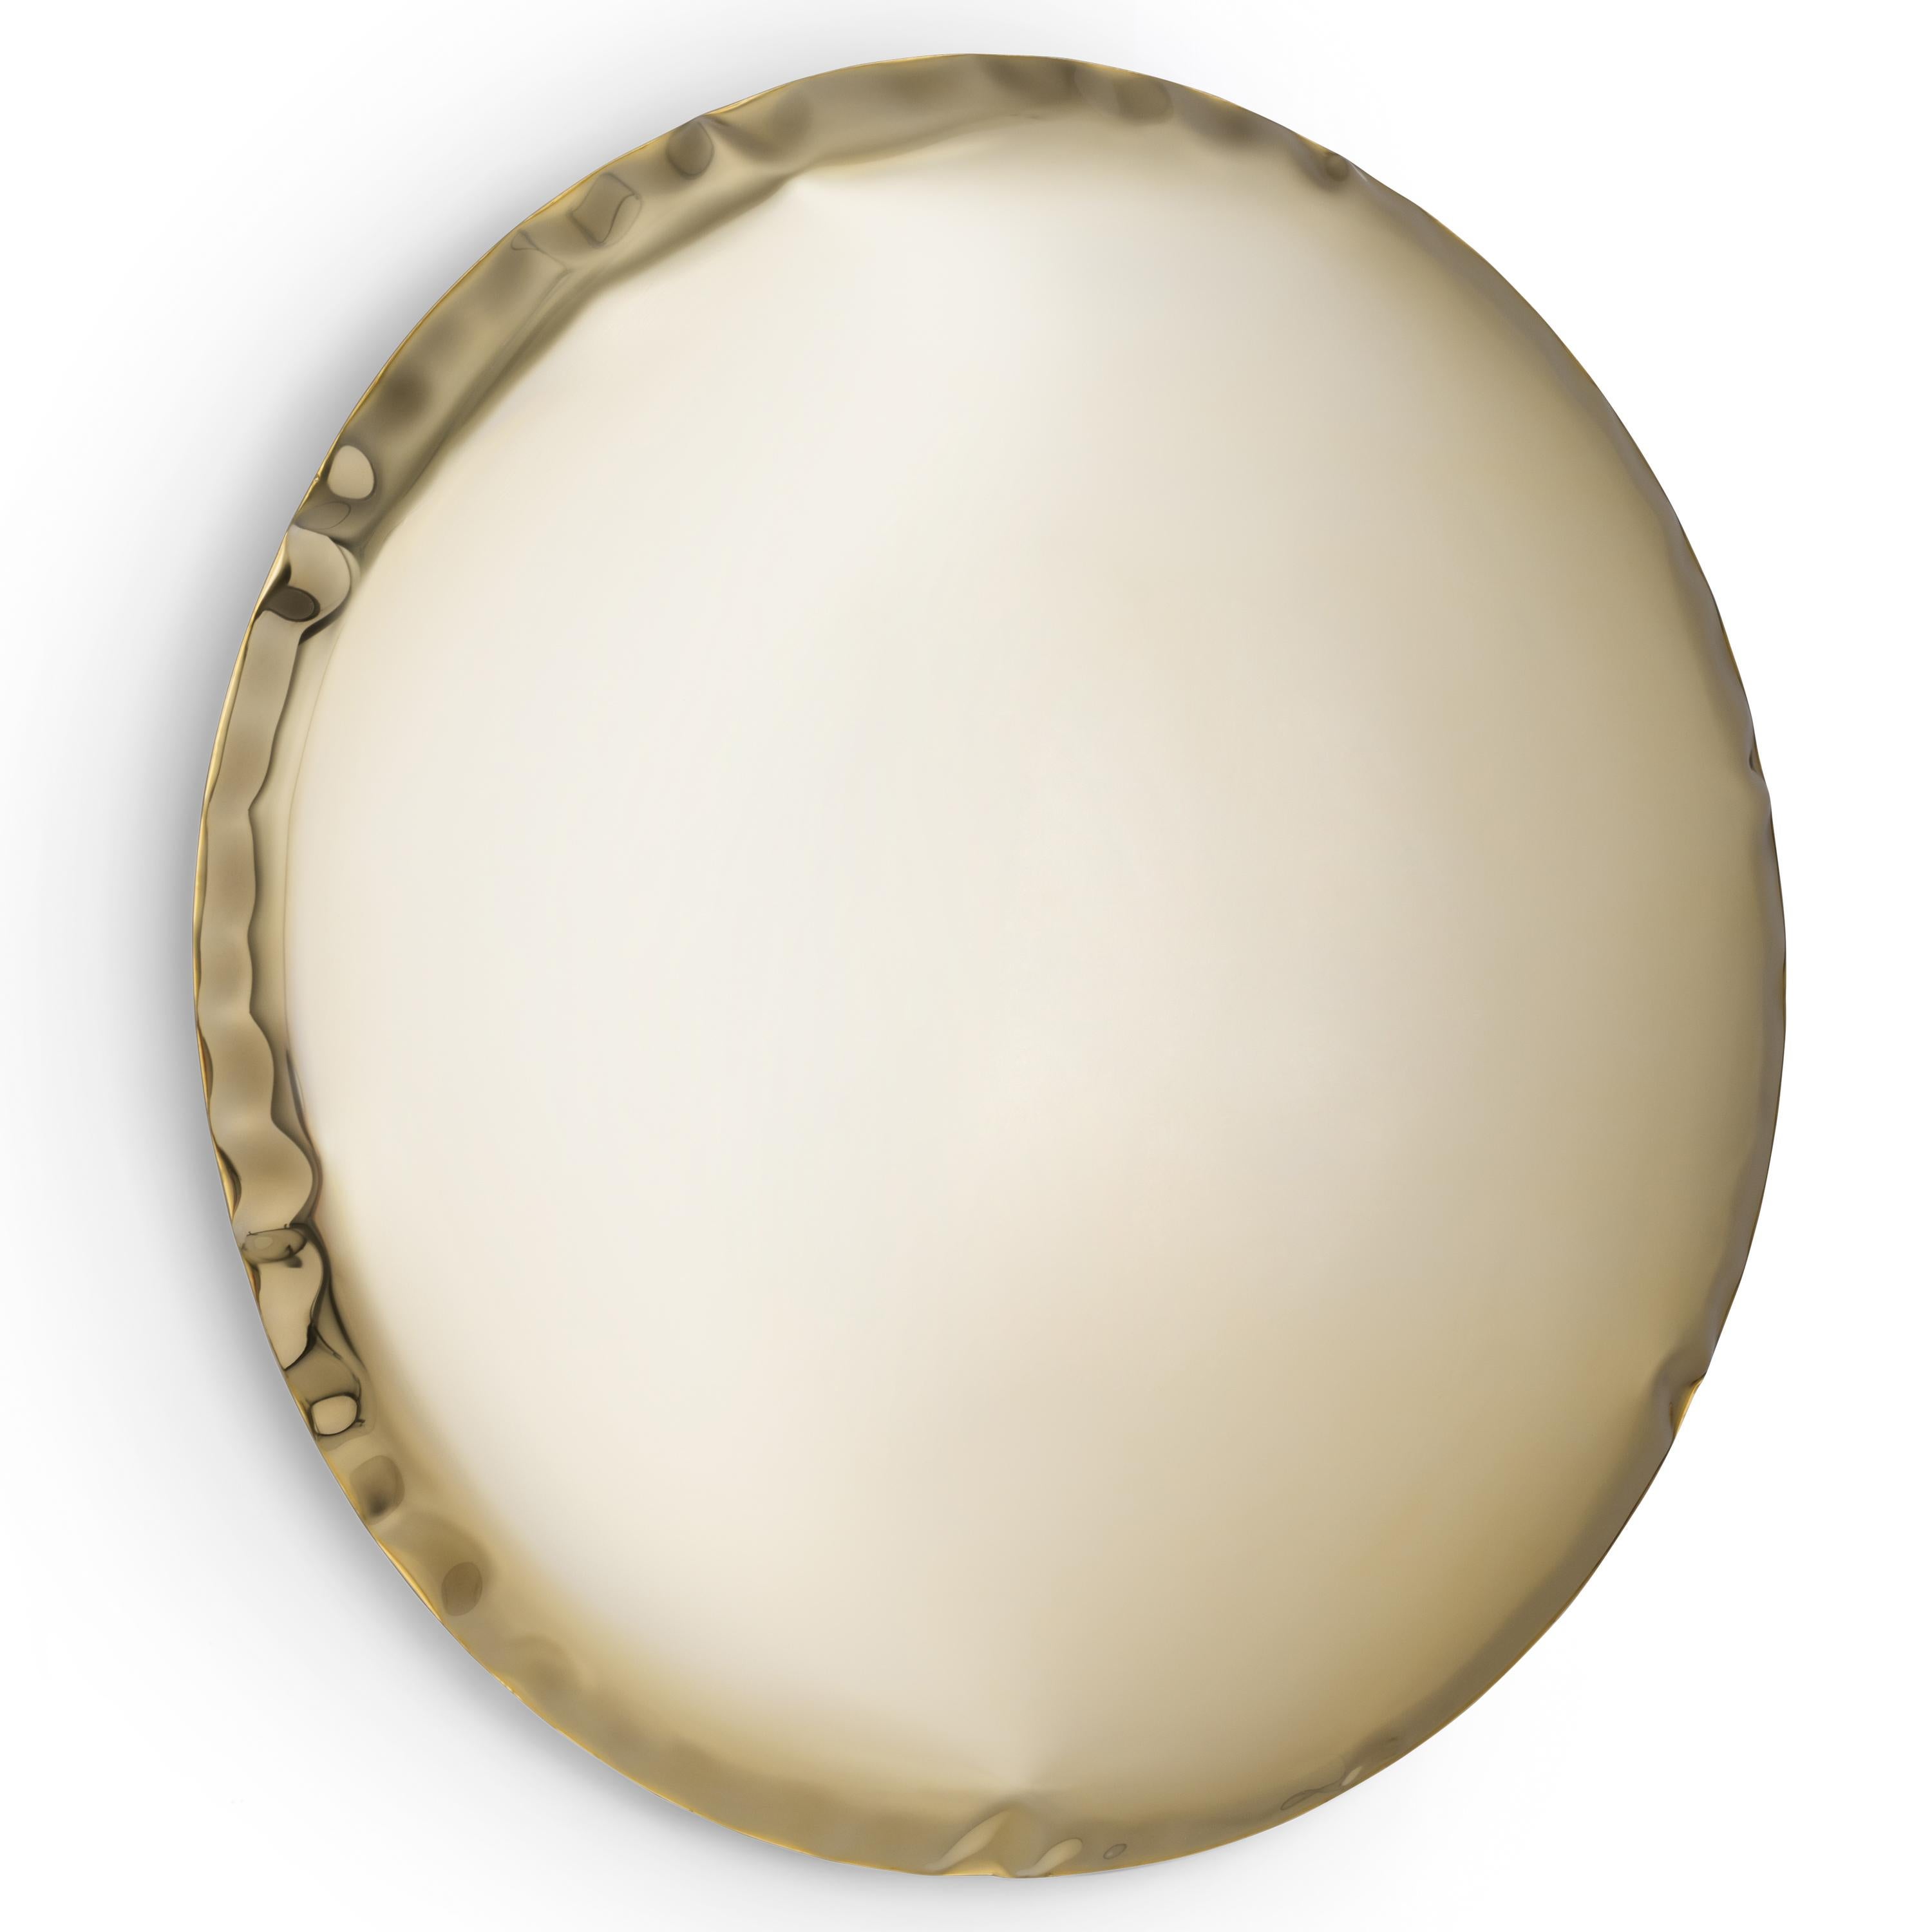 Polish Contemporary Mirror 'OKO 95', Aurum Collection, Rose Gold, by Zieta For Sale